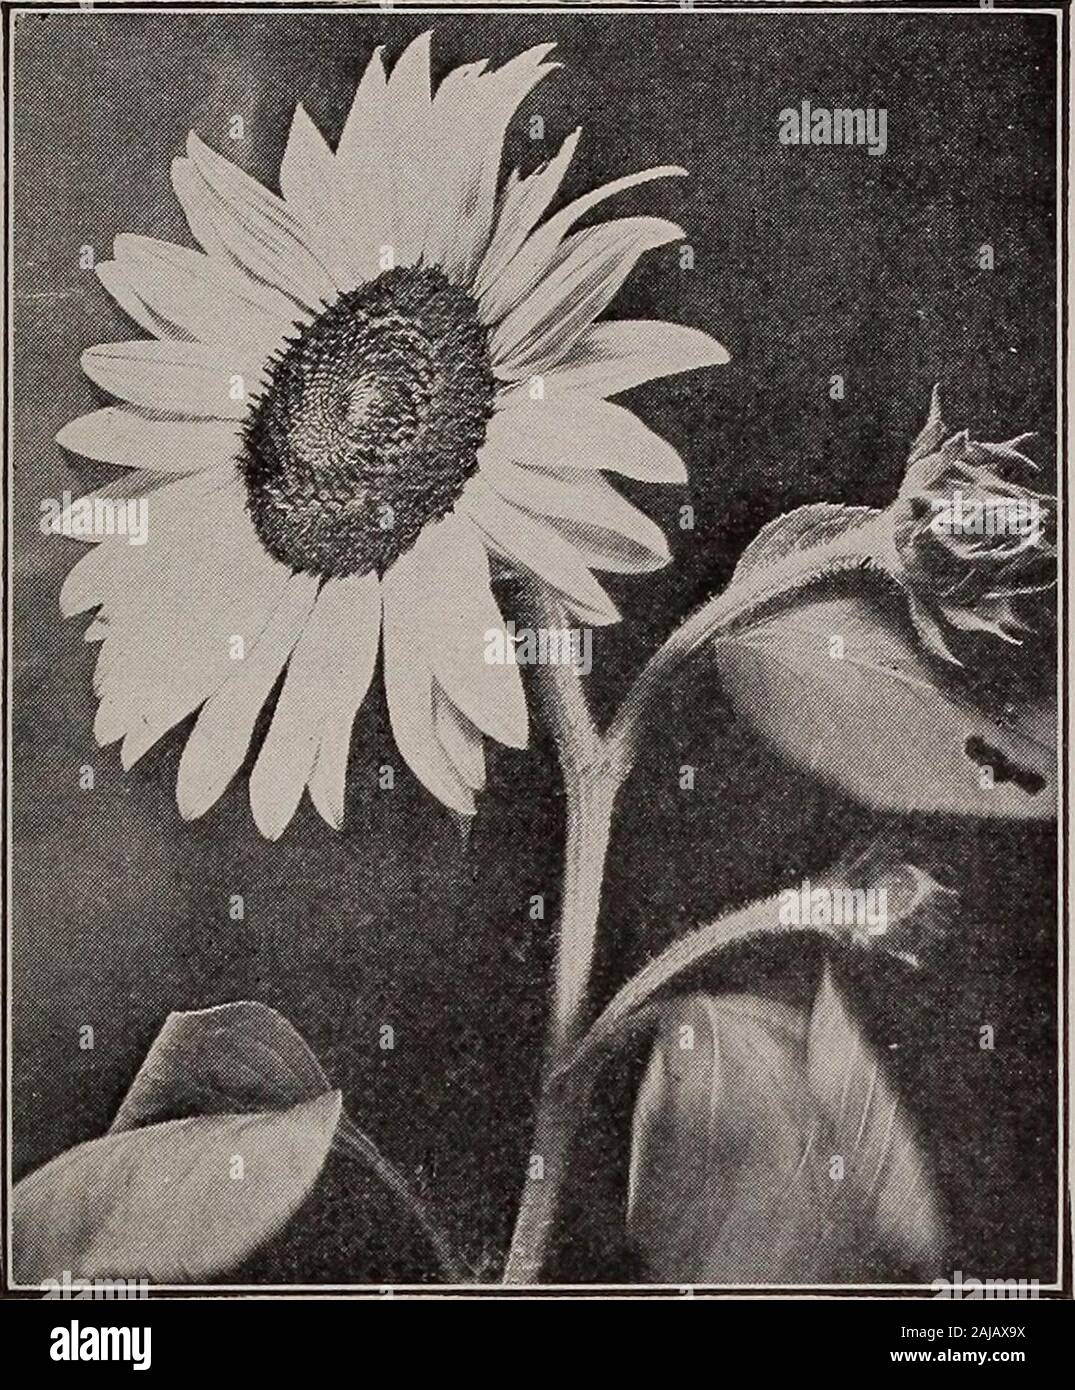 Elementary botany . Cephalanthus), etc., or in the short-ening of the peduncles in an umbel, as in the daisy, dandelion,and other composite flowers. In these the head is surroundedby an involucre, which in the young head often envelopes themass of flowers, thus affording them protection. In some othercomposites (Lactuca, for example) the involucre affords pro-tection for a longer period, even while the seeds are ripening. 826. The spadix — When the main axis of the flower clusteris fleshy, the spike or head forms a spadix, as in the Indian tur-nip, the skunk cabbage, the calla, etc. The spadix Stock Photo